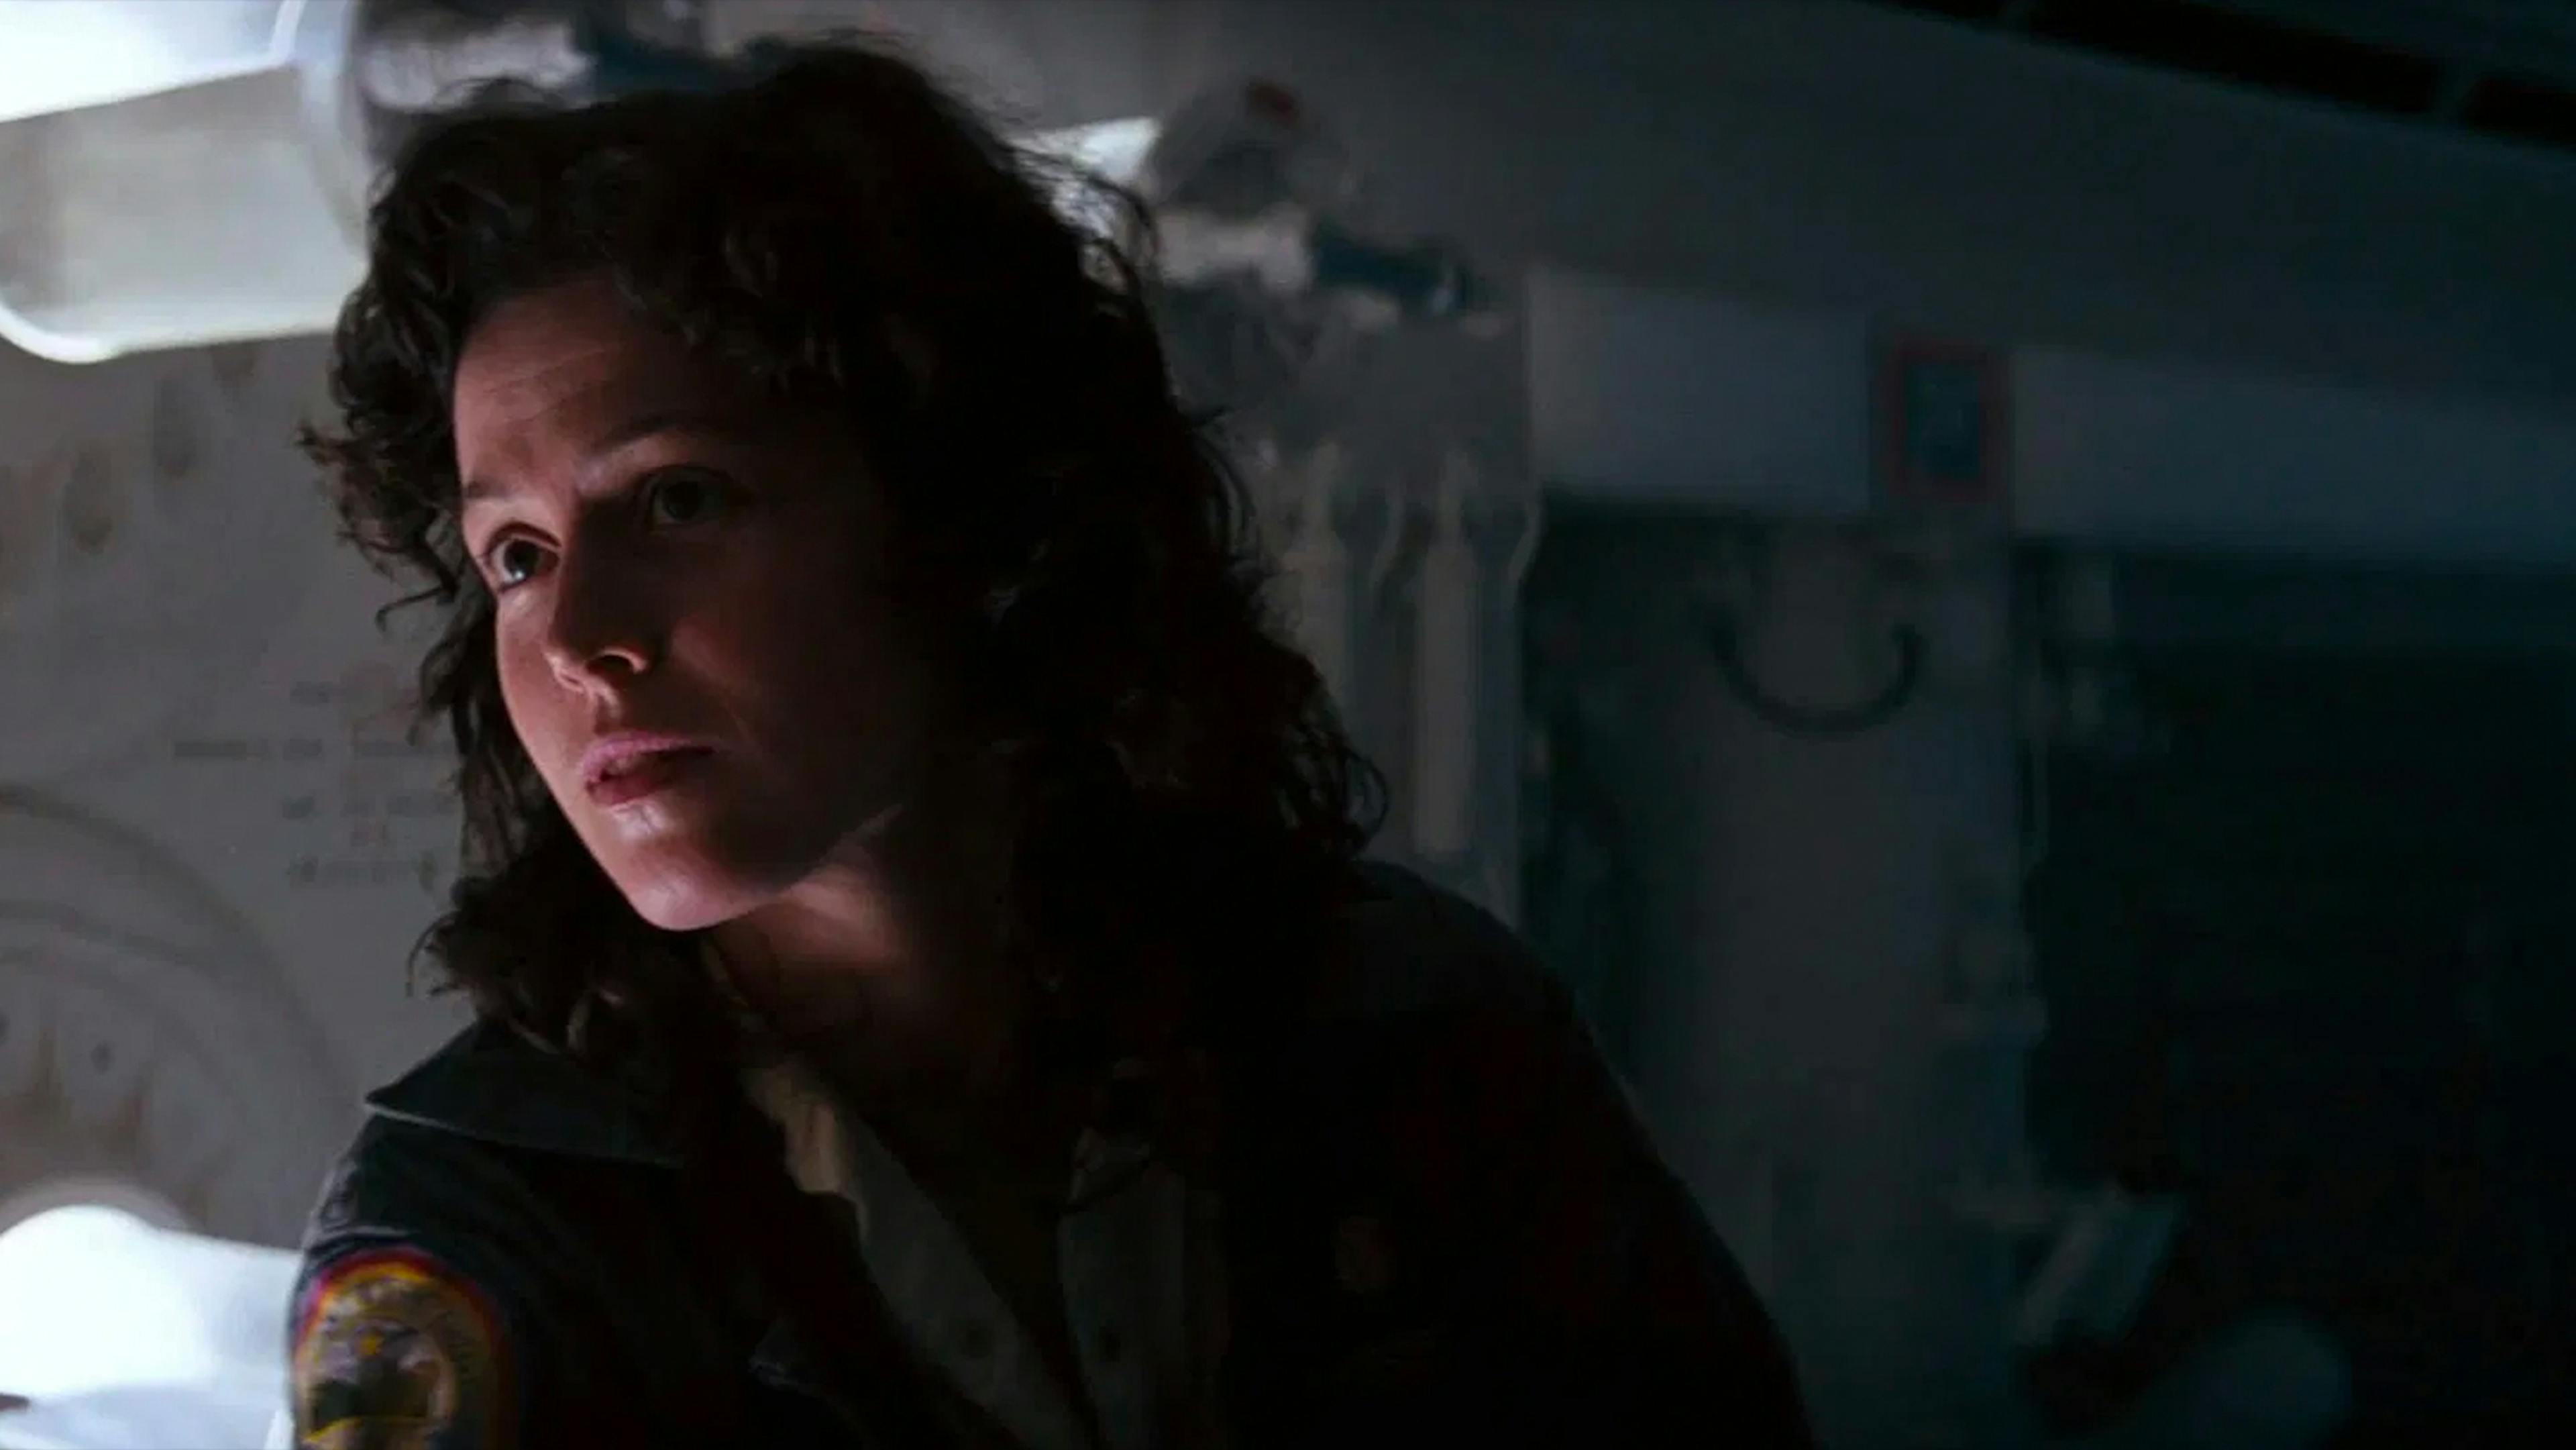 “There’s no movie like it”: Why Alien continues to terrify and inspire musicians